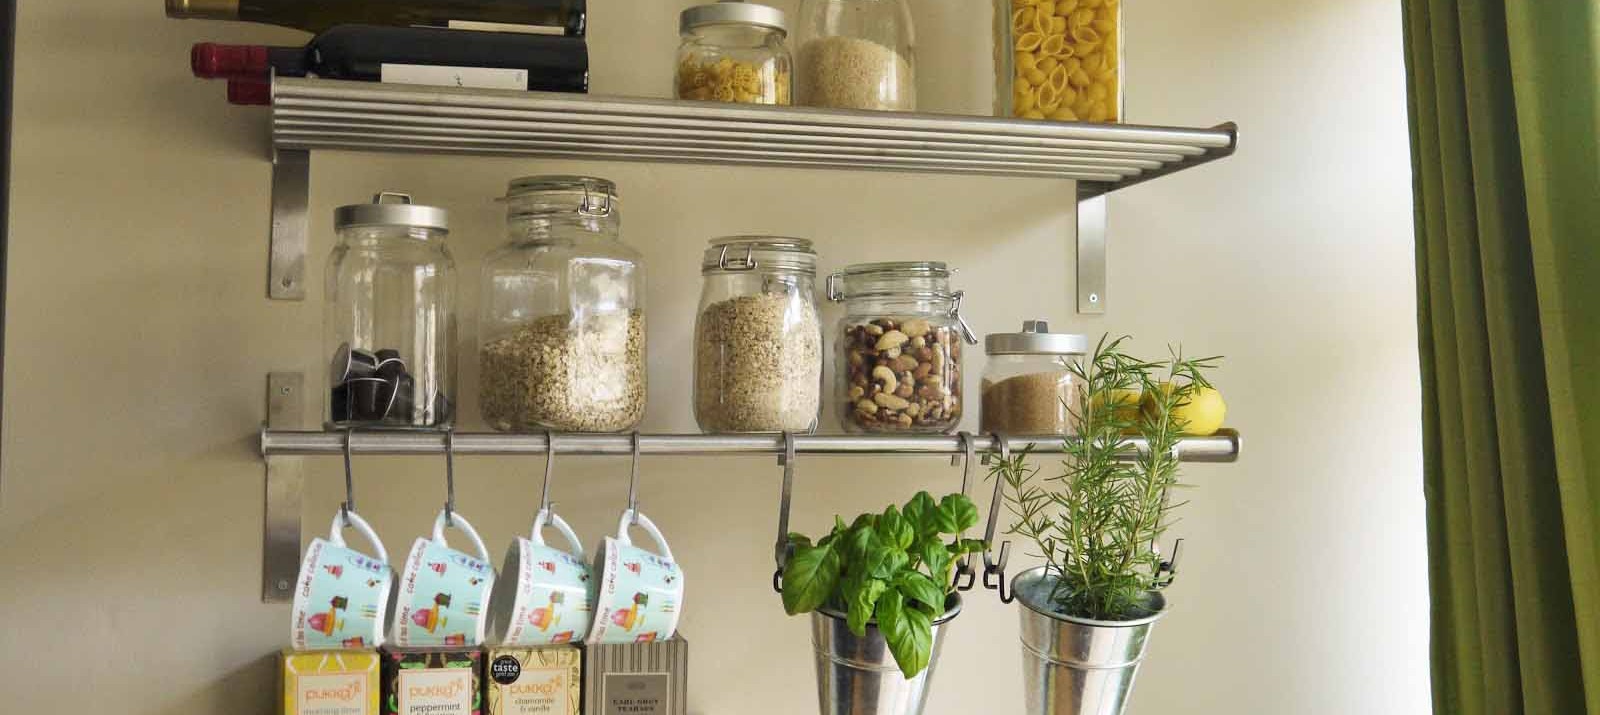 Space-saving storage ideas for small kitchens